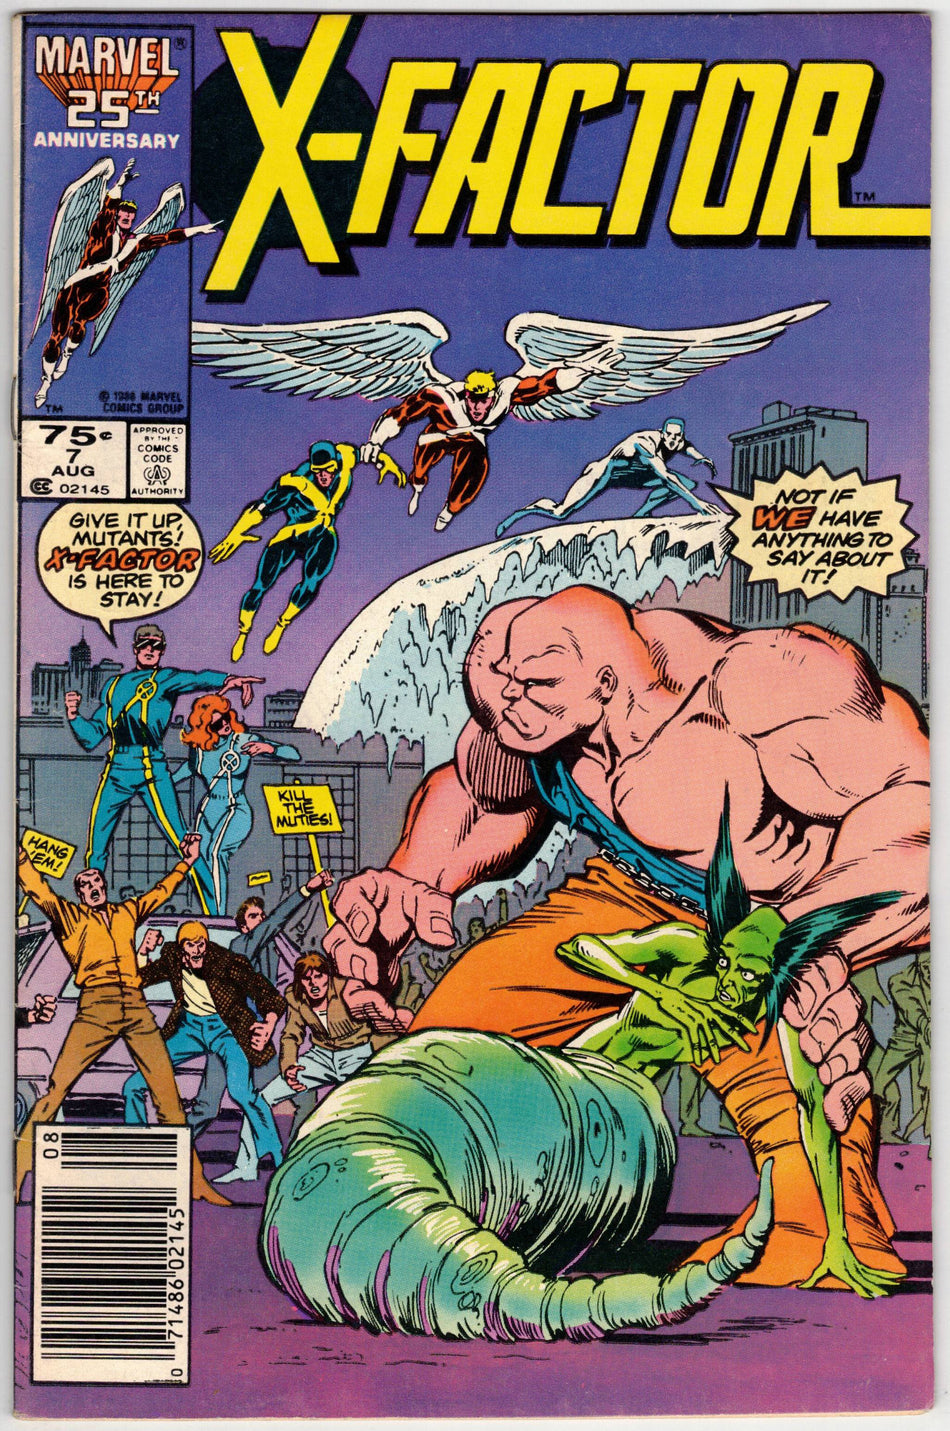 Photo of X-Factor, Vol. 1 (1986) Issue 7B - Very Fine - Comic sold by Stronghold Collectibles